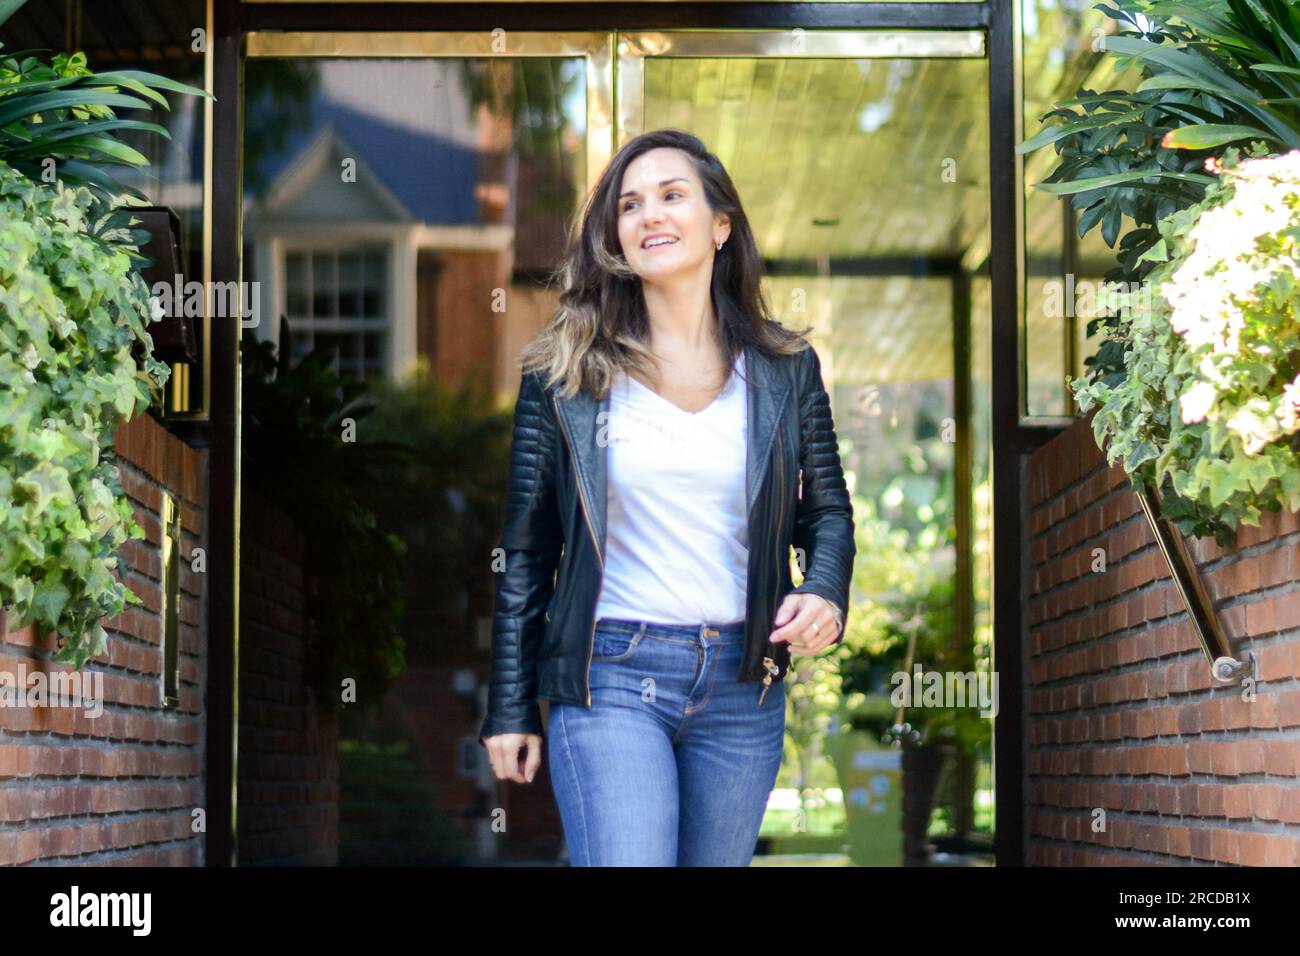 Woman looking away while walking through building Stock Photo